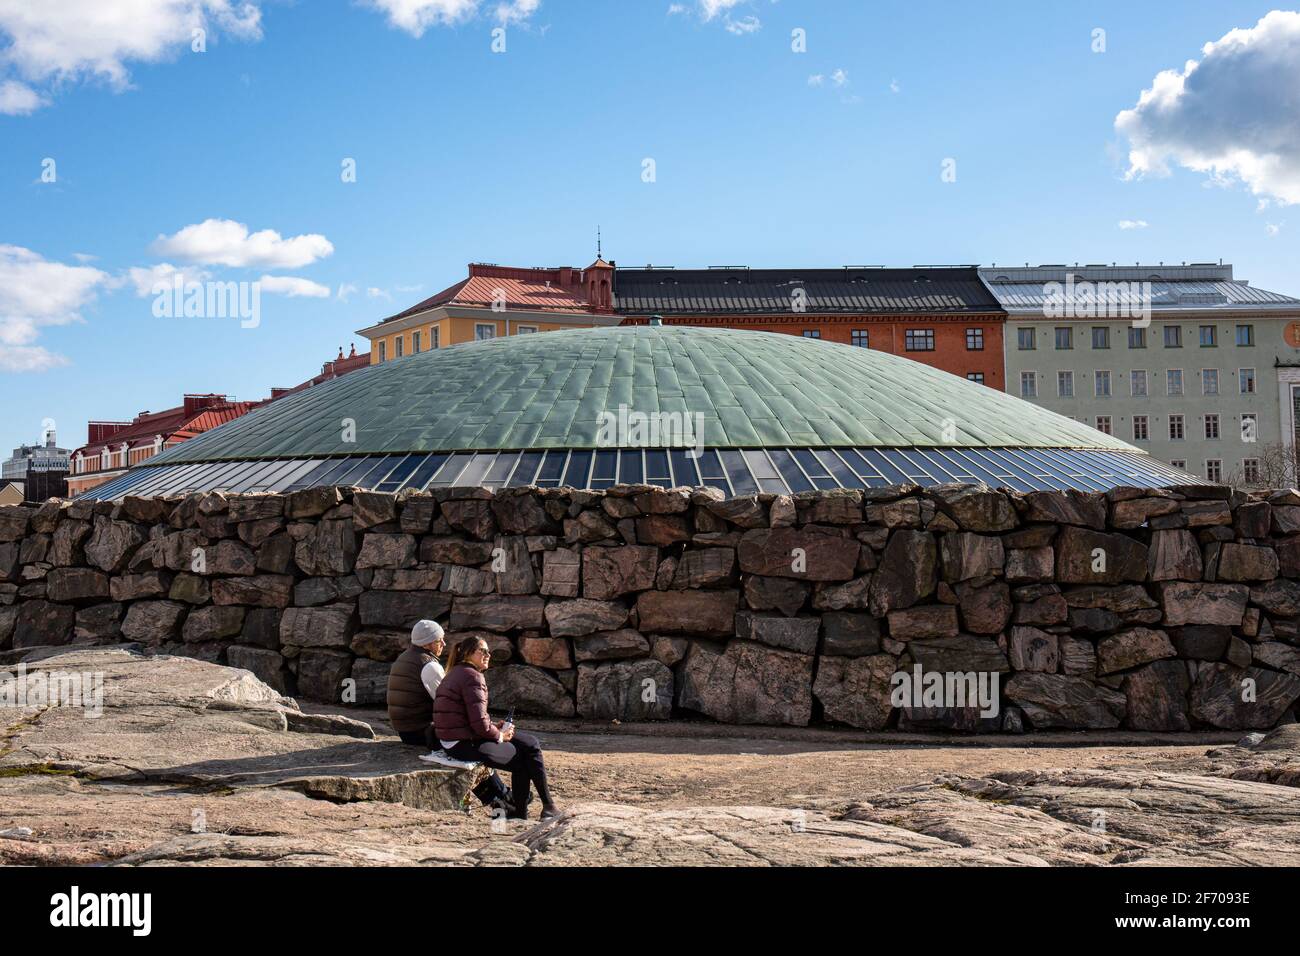 Copper dome roof of Temppeliaukio Church, built directly into solid rock in Etu-Töölö district of Helsinki, Finland Stock Photo